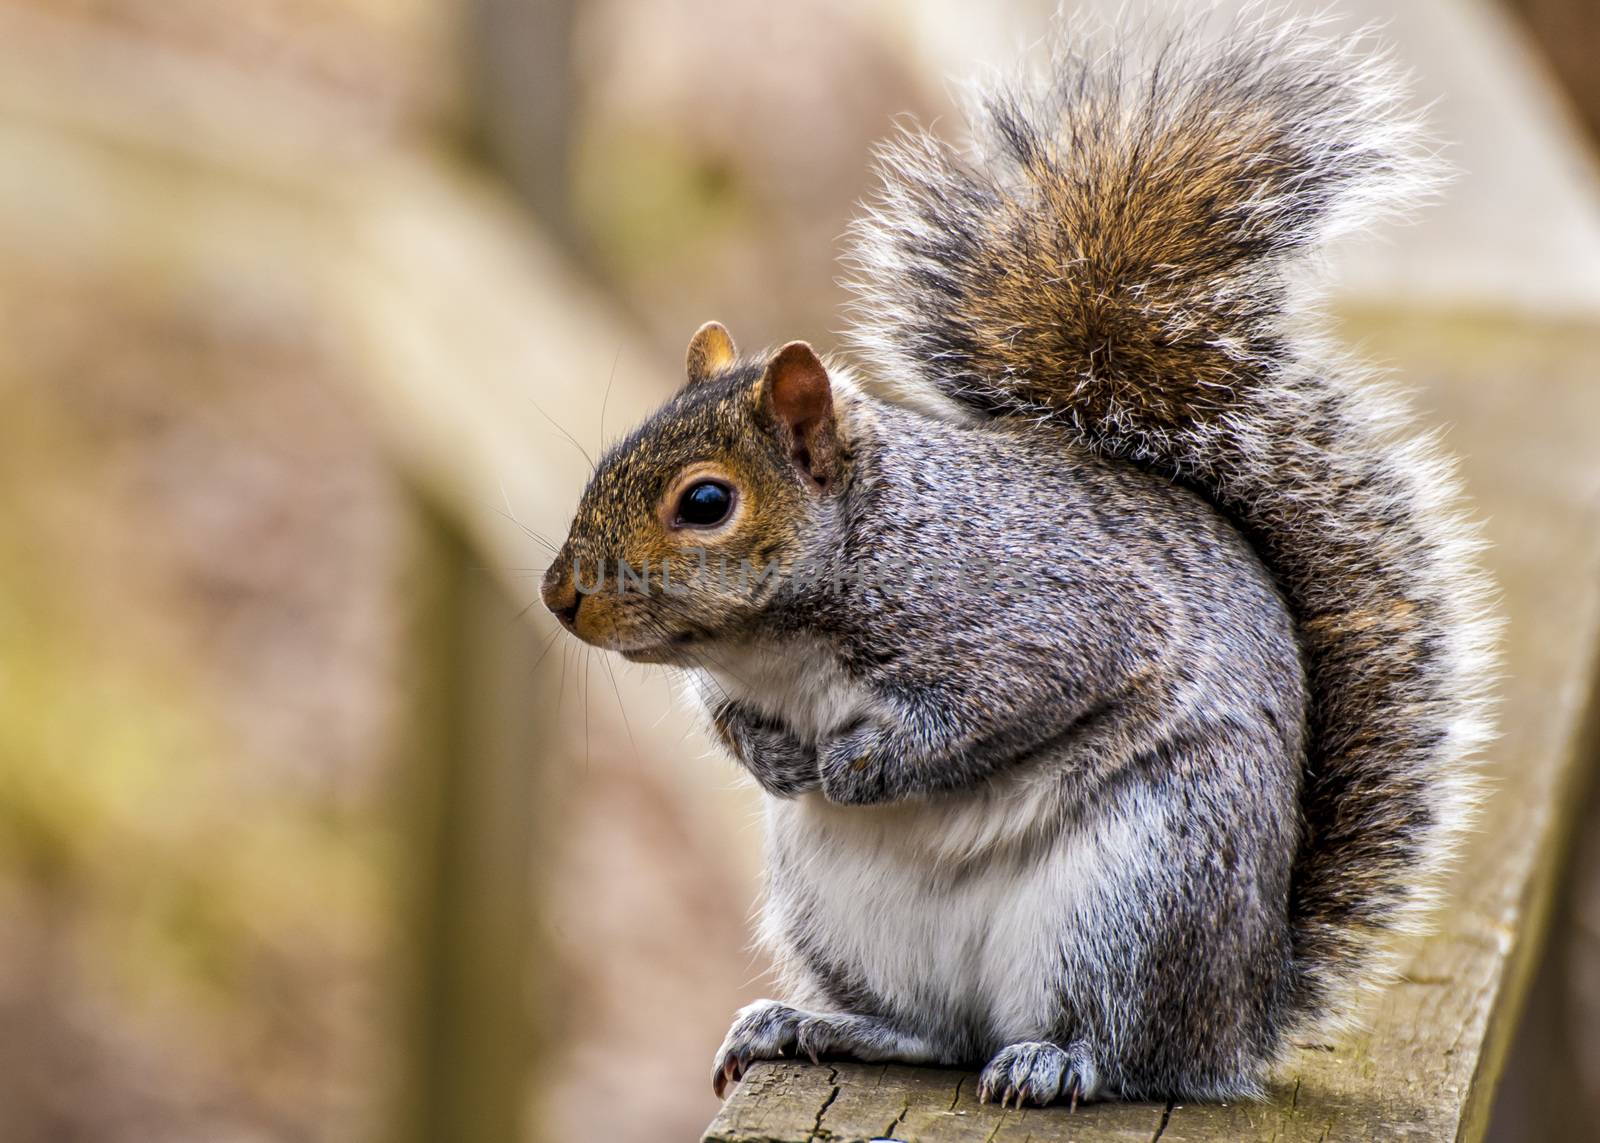 A grey squirrel perched on a fence.